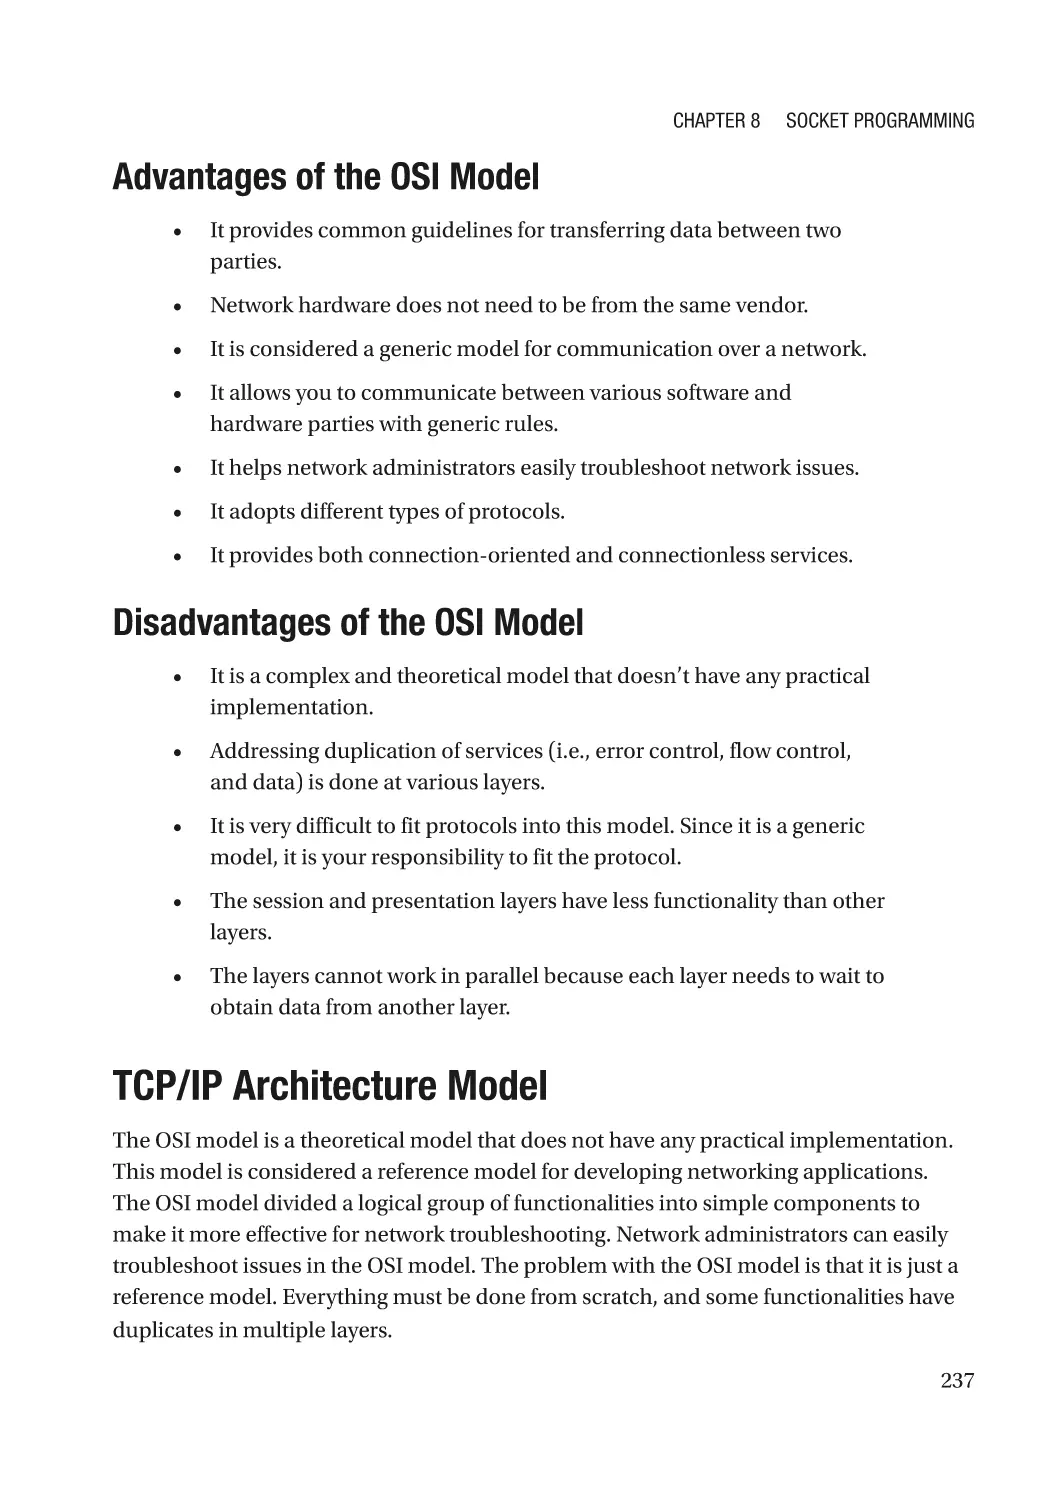 Advantages of the OSI Model
Disadvantages of the OSI Model
TCP/IP Architecture Model